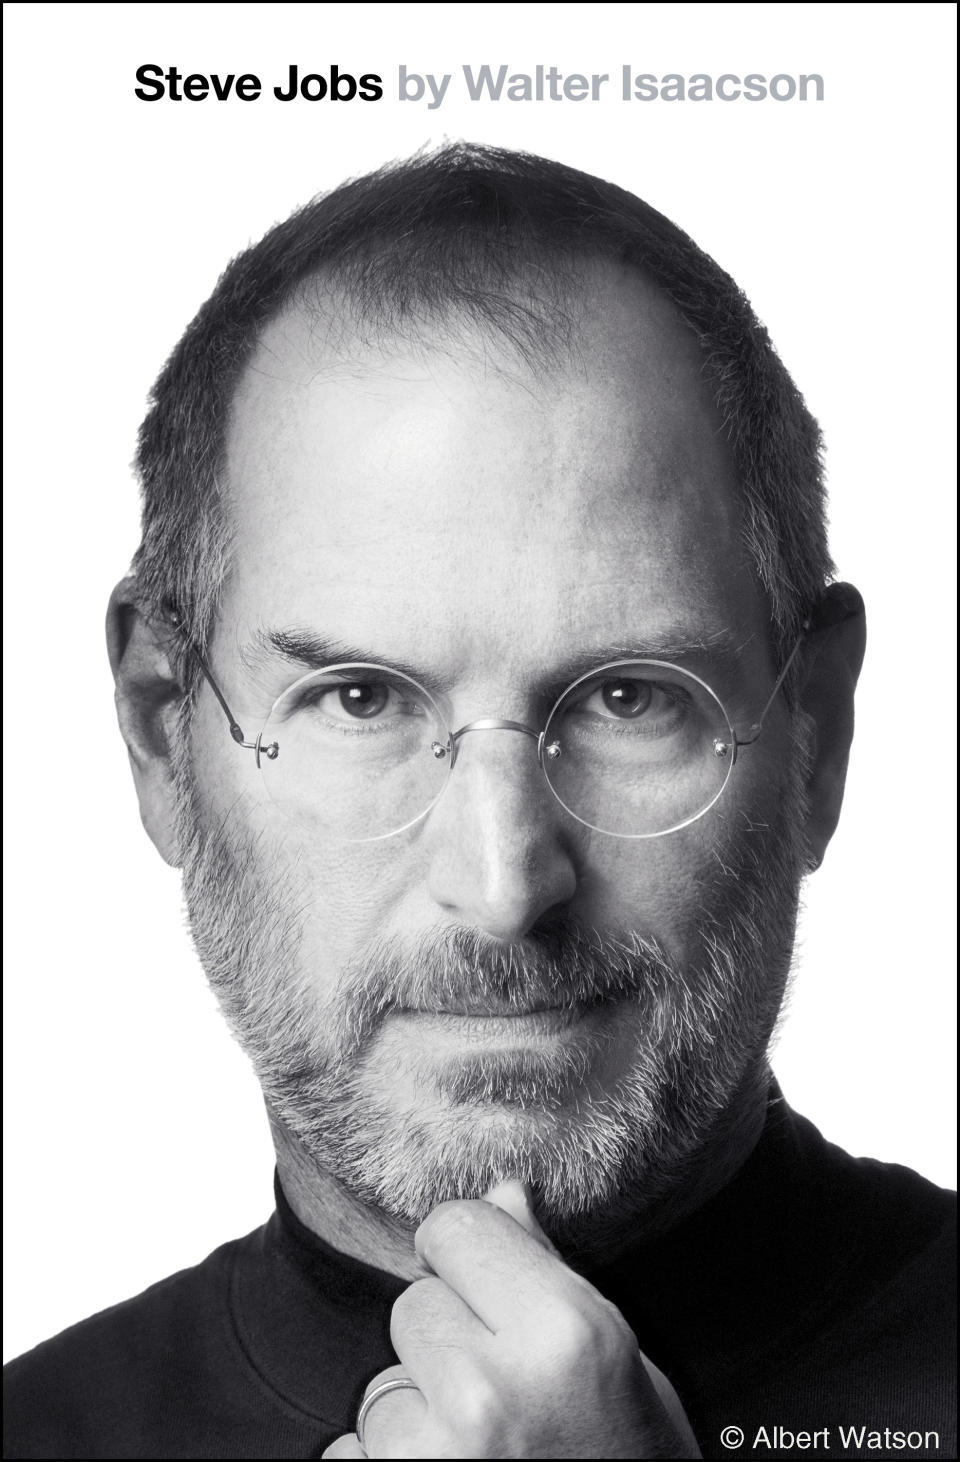 This cover image released by Simon & Schuster shows "Steve Jobs" by Walter Isaacson. (Simon & Schuster via AP)